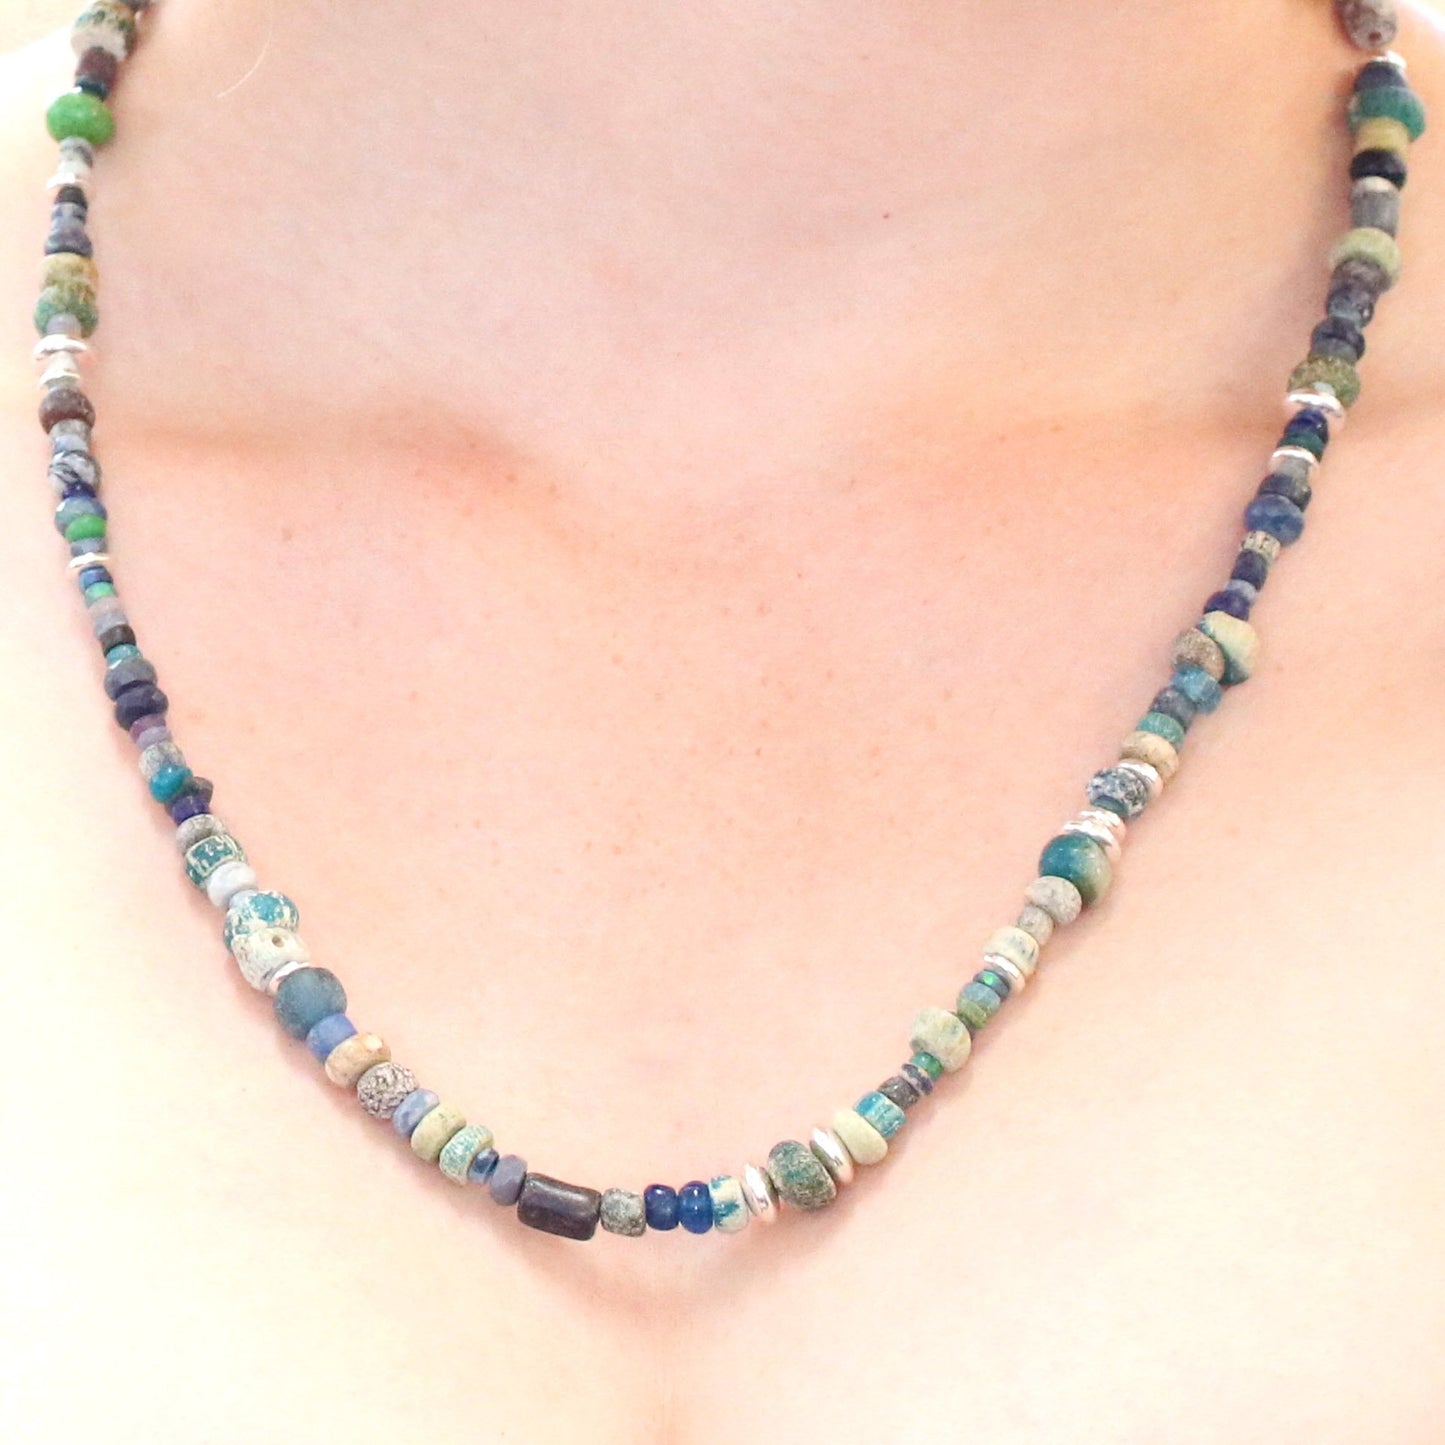 Ancient Mali Dig Beads Necklace Sterling And Black Opals -NewWorldGems